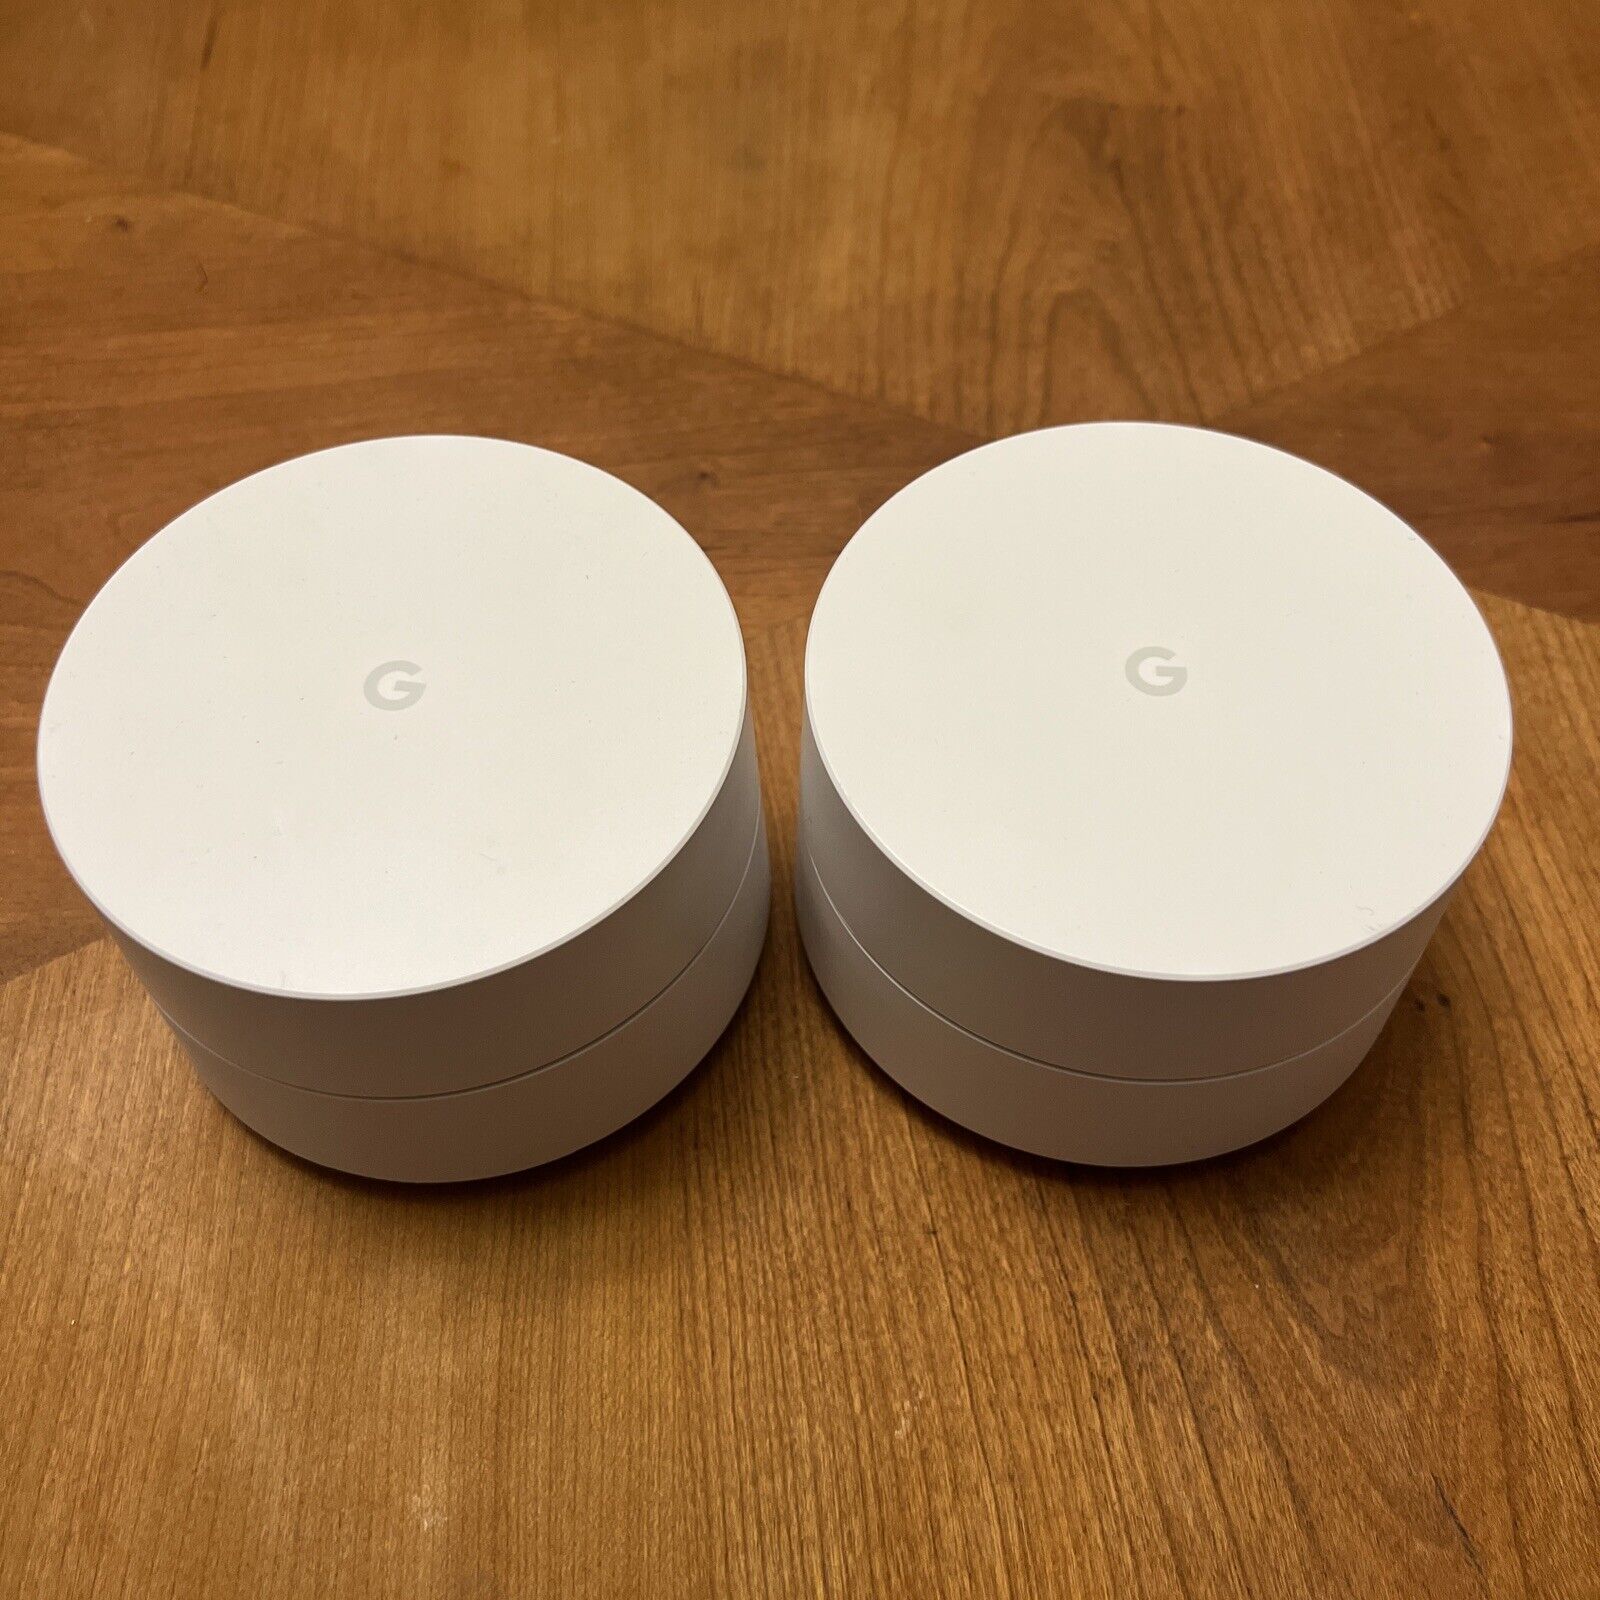 2 Pack Google AC-1304 1 Port 1200Mbps Wireless Router